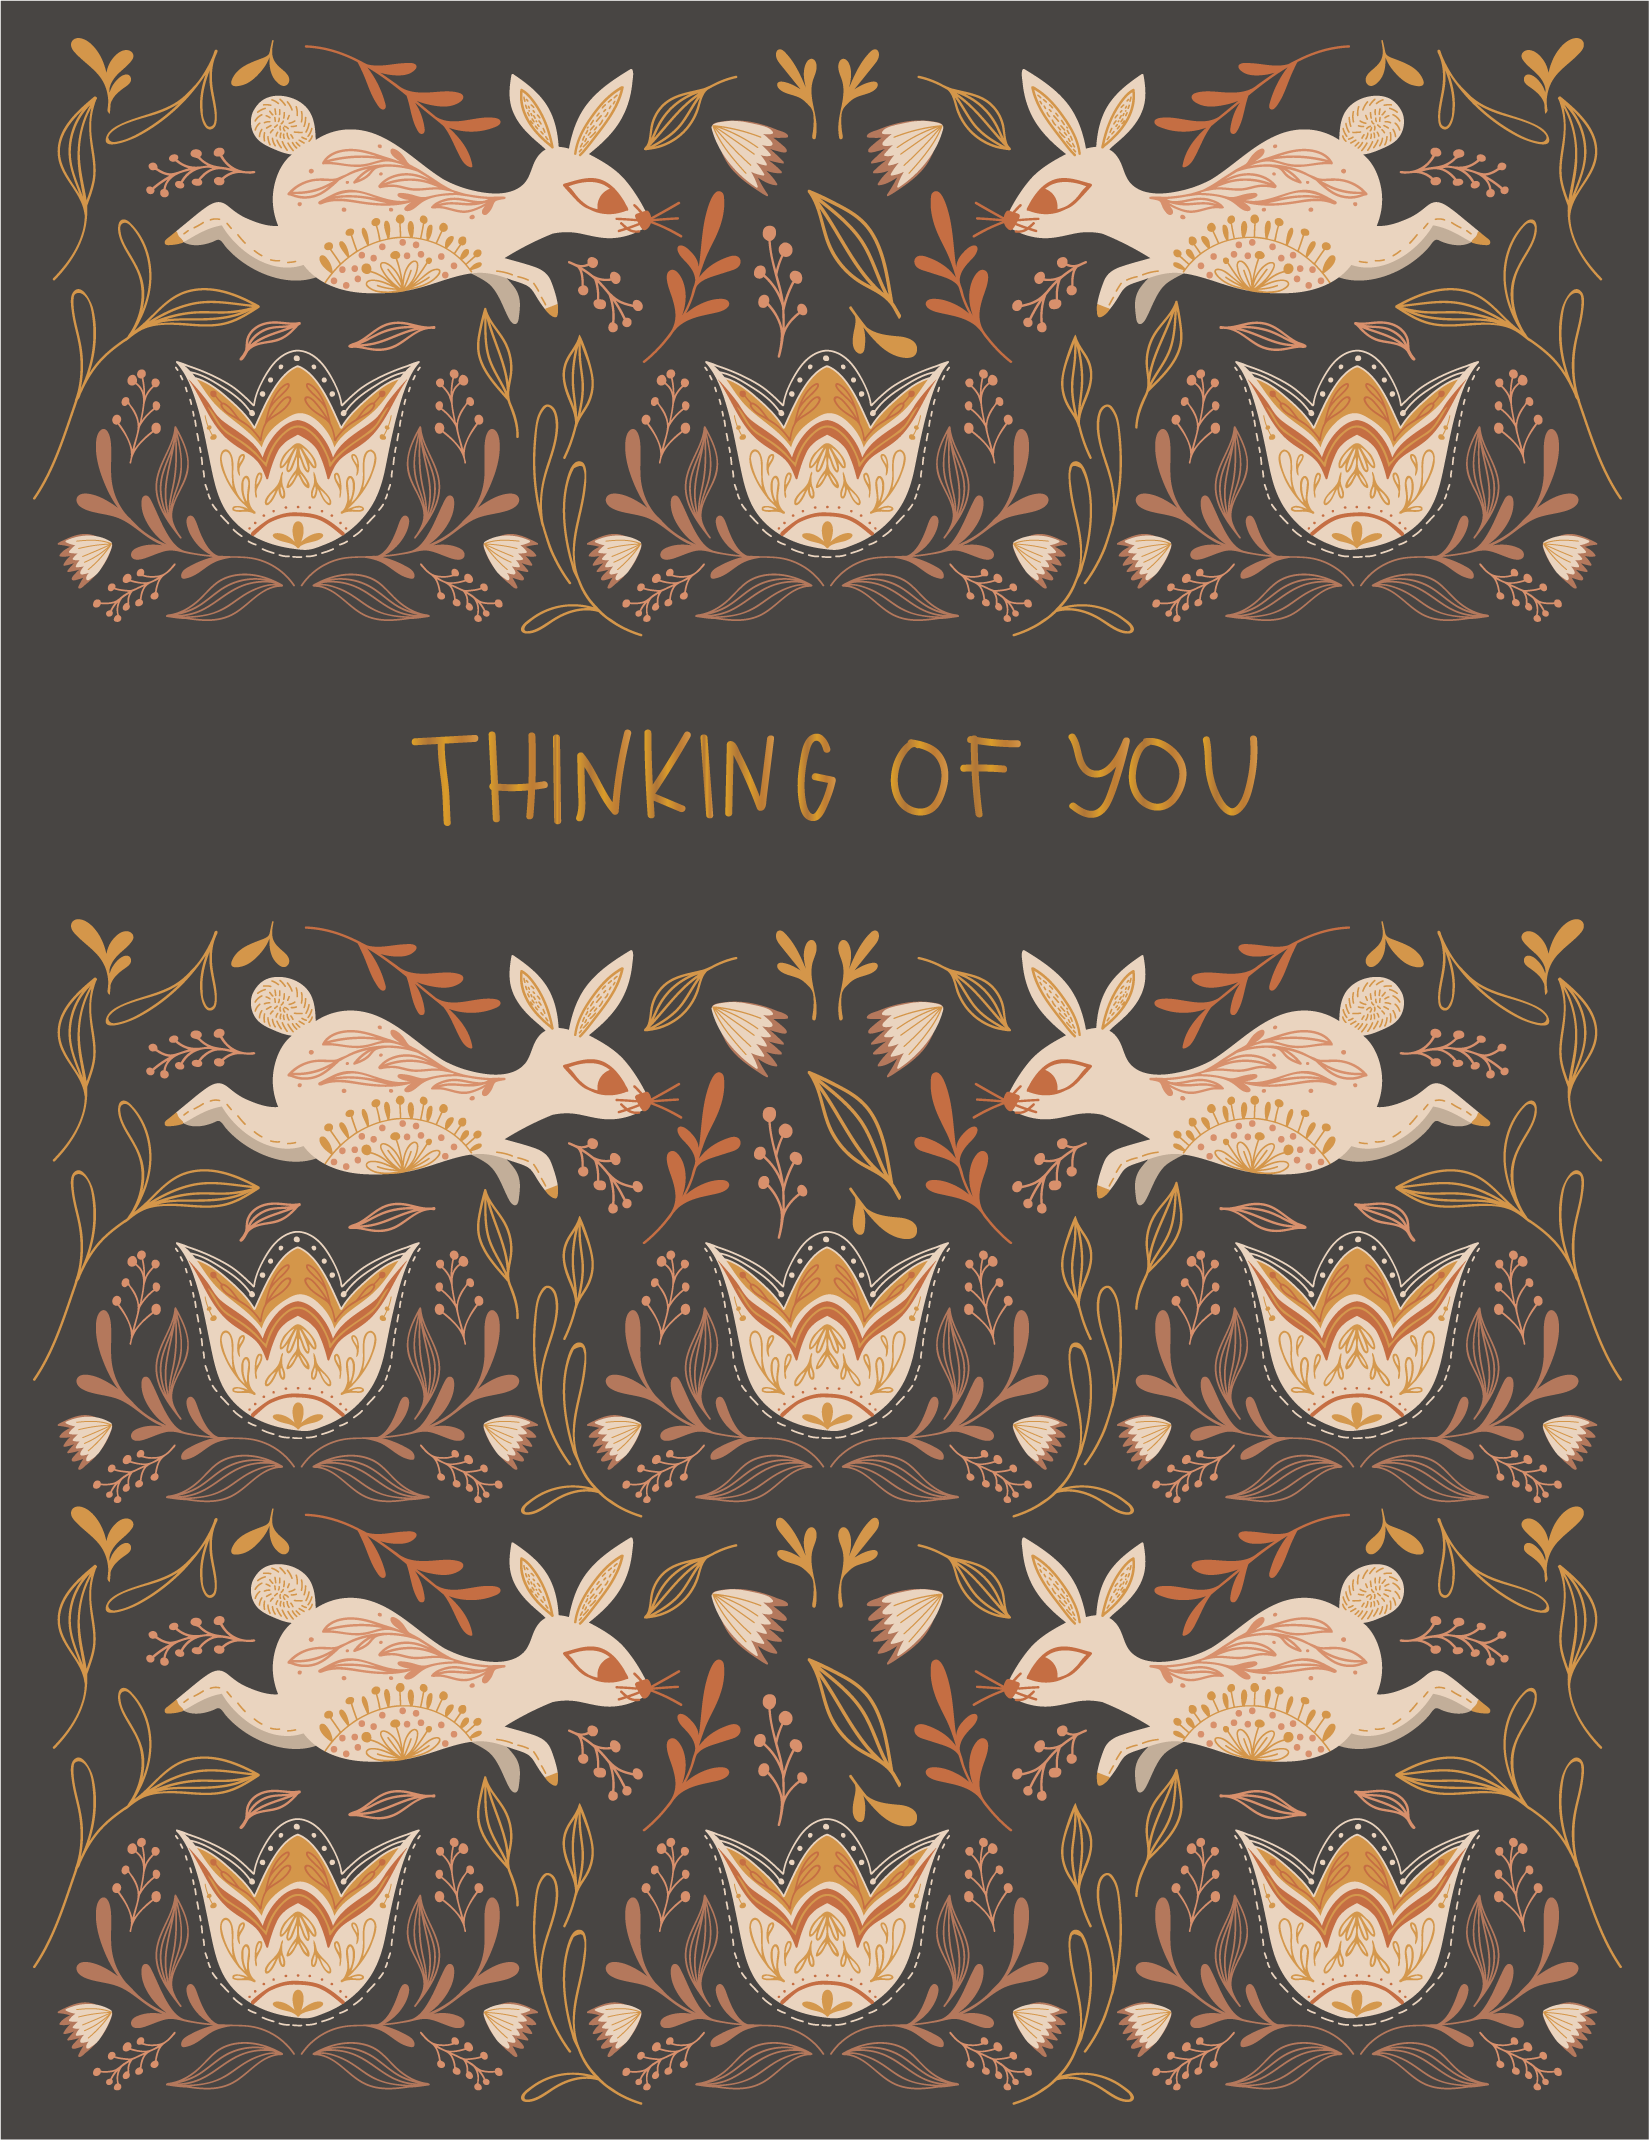 Thinking of You Bunnies Gold Foil Greeting Card